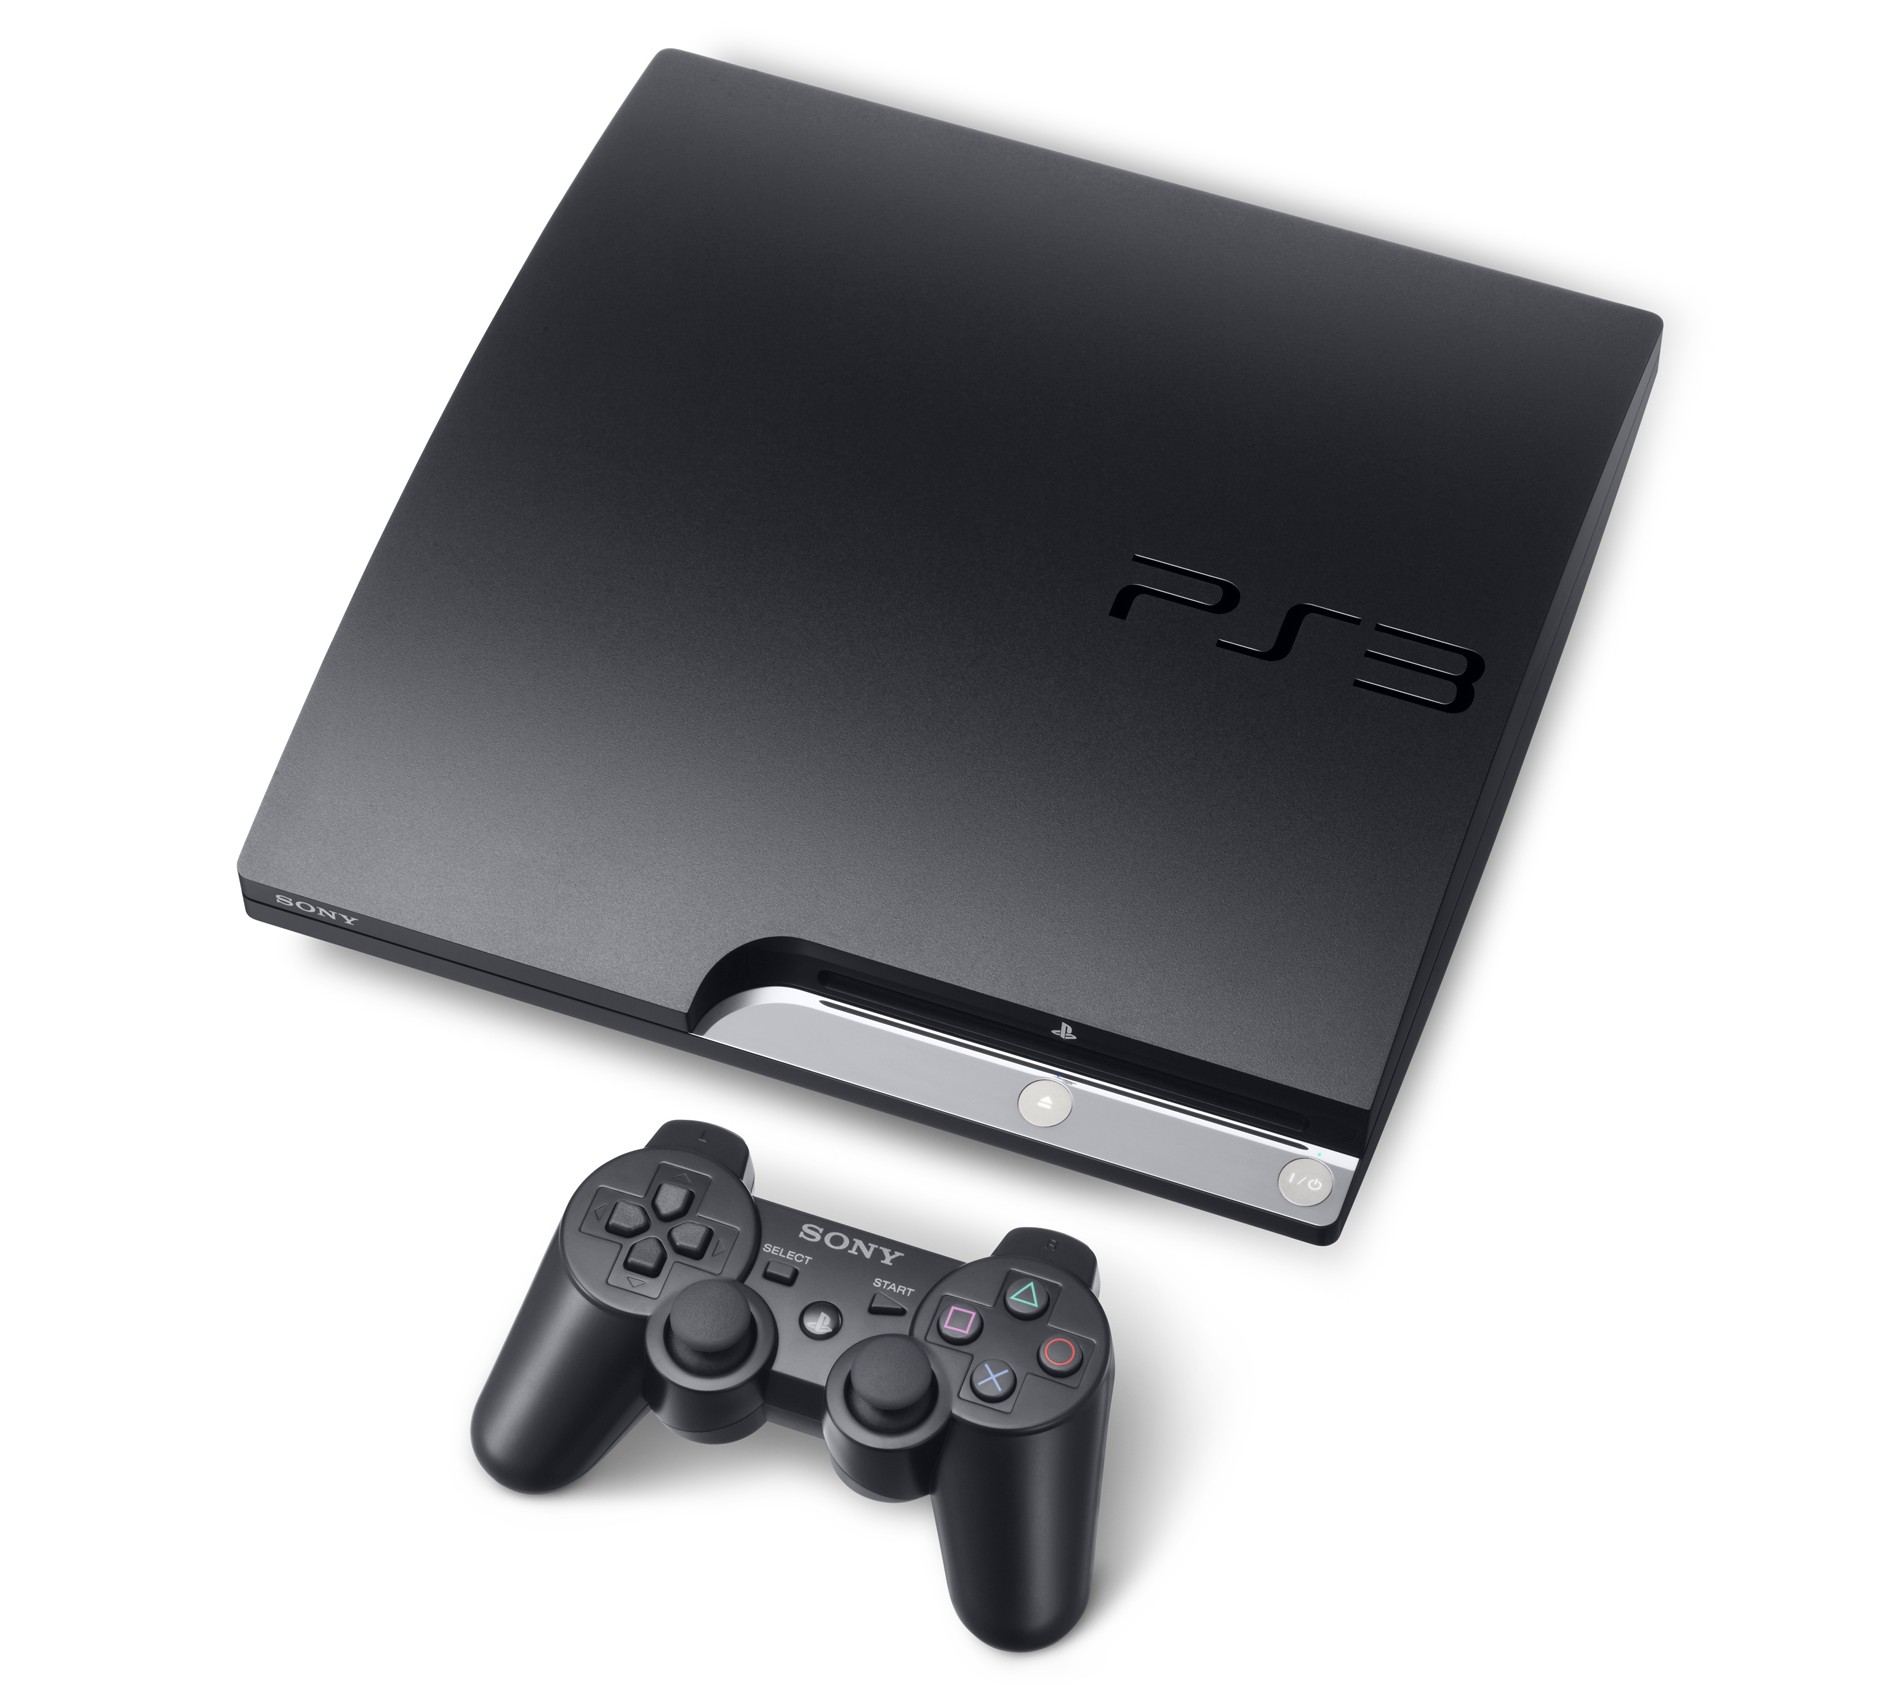 Ps3 old. Sony PLAYSTATION 3 Slim. Ps3 PLAYSTATION 3 Sony. Sony PLAYSTATION 3 (ps3) Slim. Ps3 Slim 320gb.